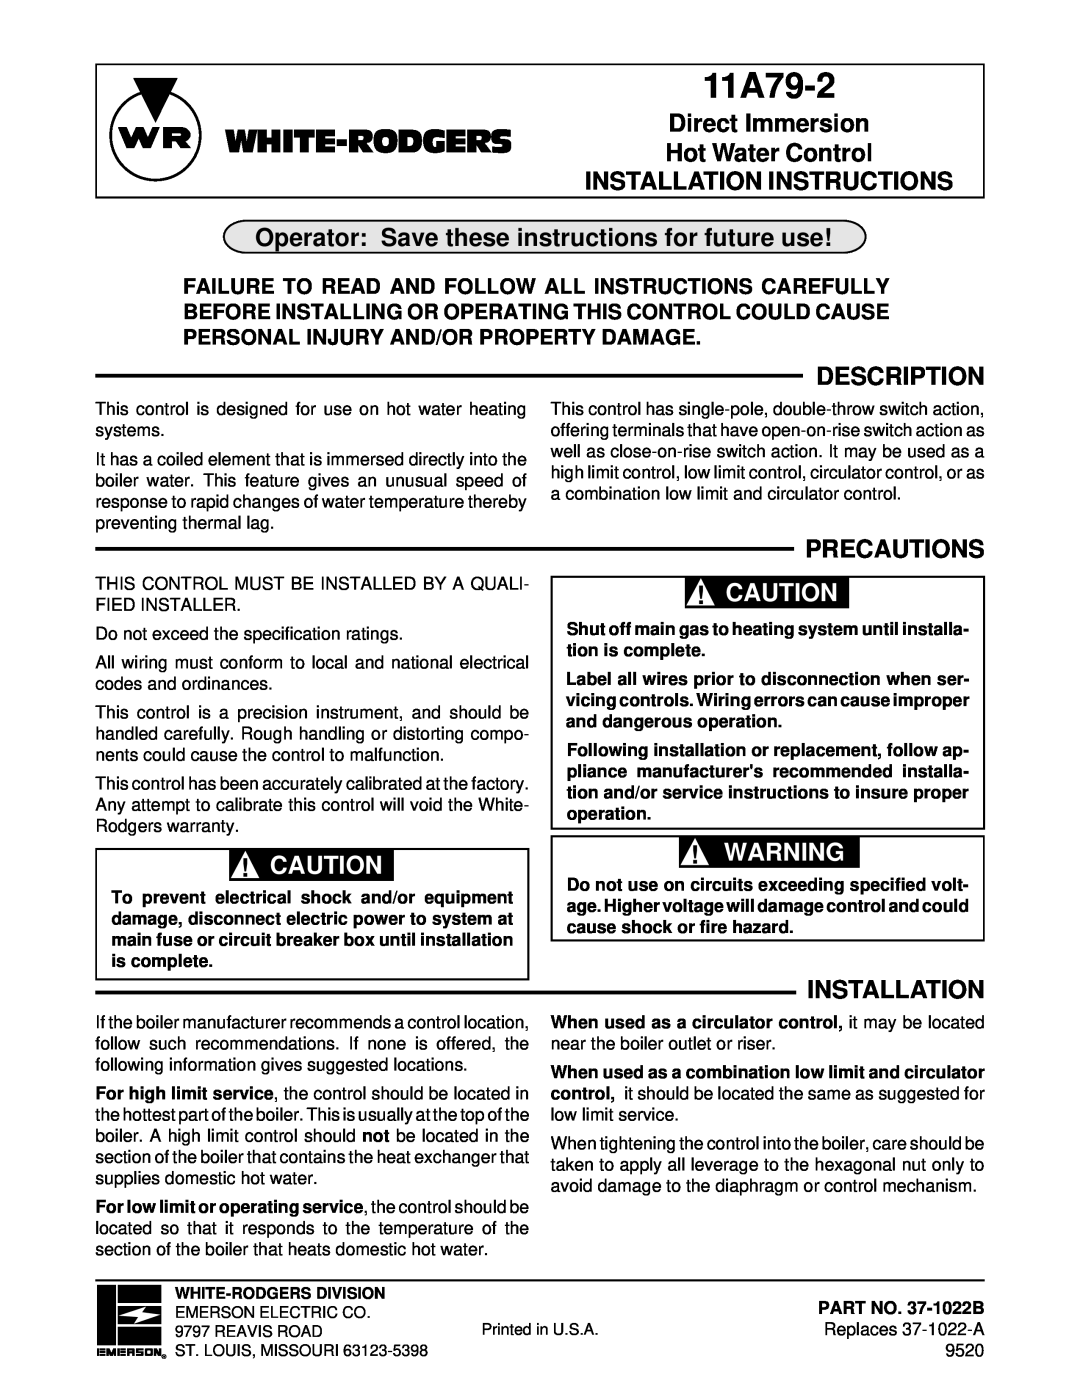 White Rodgers 11A79-2 installation instructions Direct Immersion Hot Water Control INSTALLATION INSTRUCTIONS, Description 